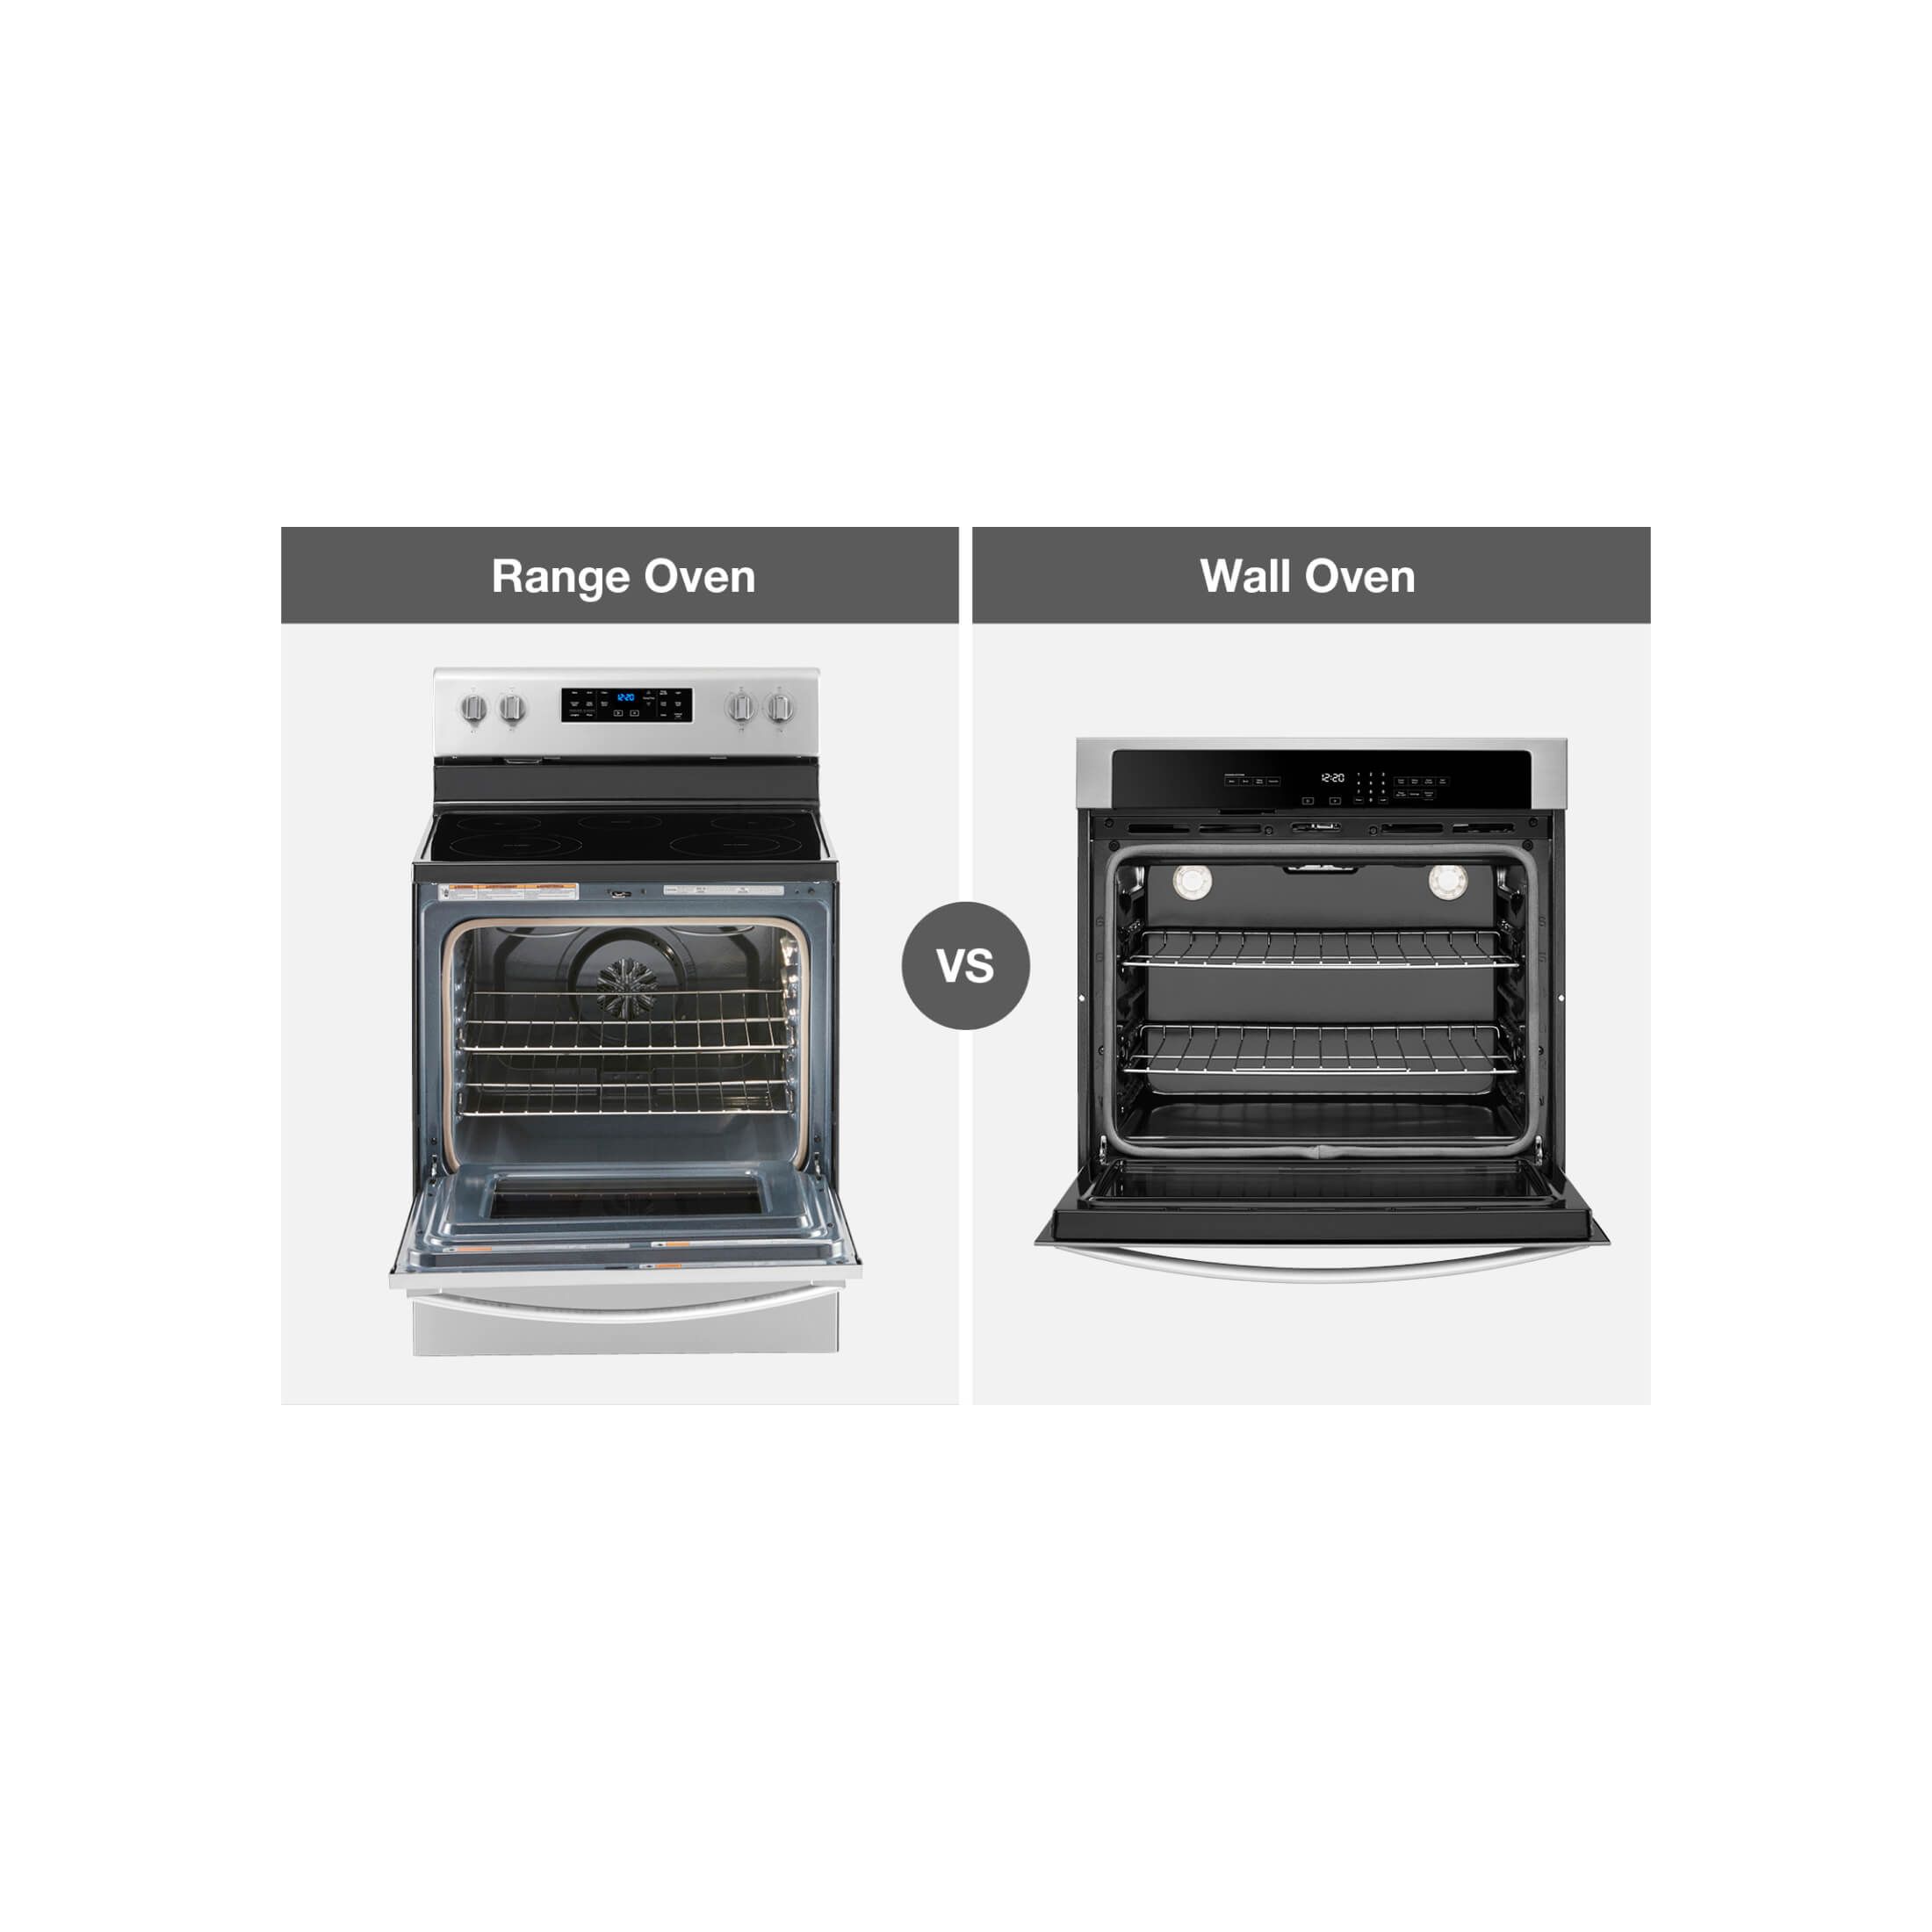 What's the Difference Between a Range, Stove and Cooktop?